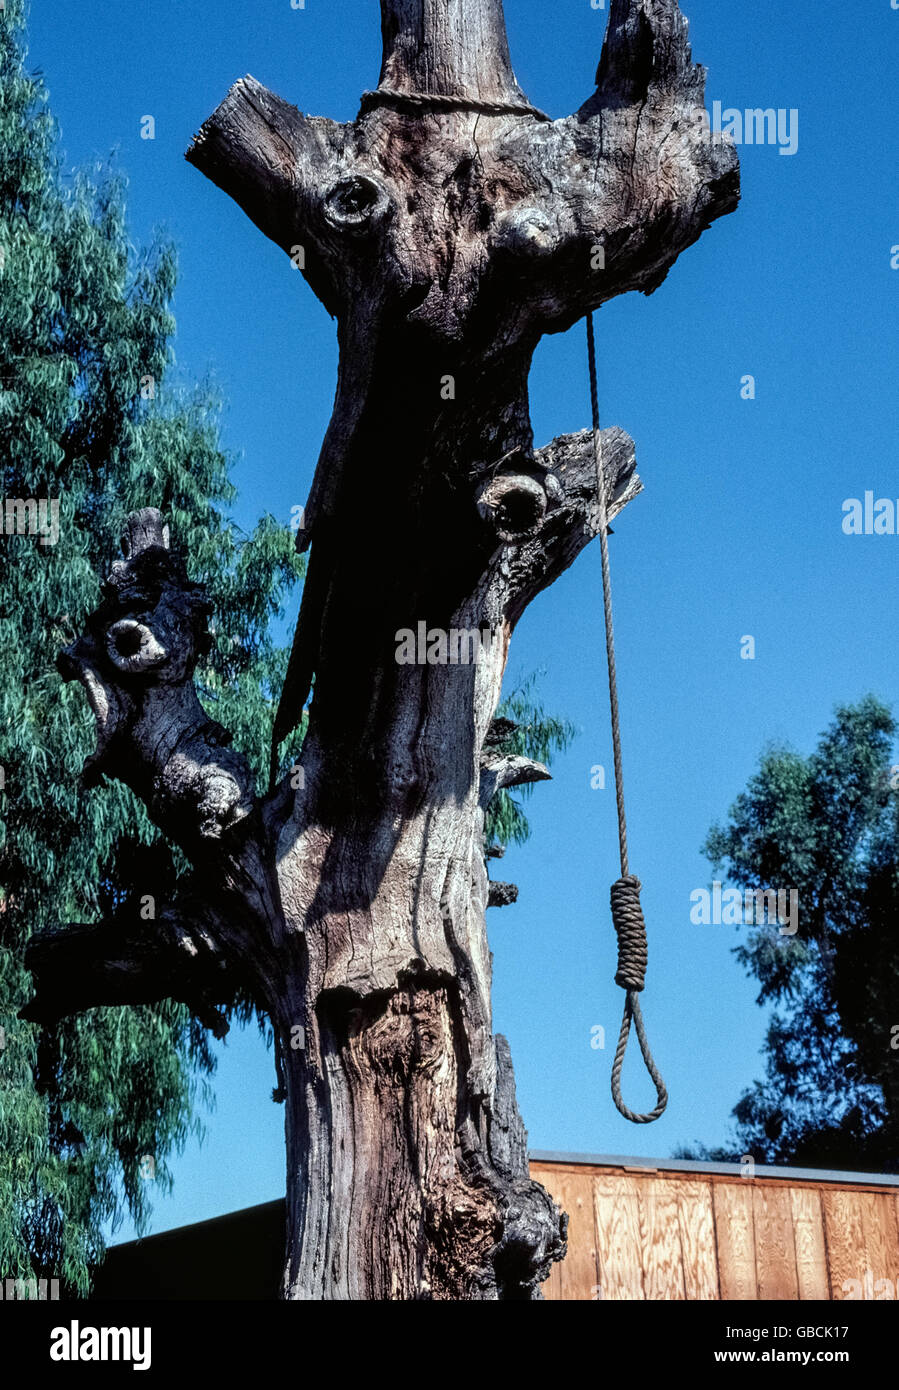 A rope noose with a large slipknot is suspended from an ancient oak that was called the Hangman's Tree in Old Town Calabasas in Los Angeles County, California, USA. The century-old oak died in the 1960s but it served as a historical landmark until toppling over during a storm in 1995. This noose was strung up in 1975; no one recalls whether there were ever any necktie parties (hangings) in Calabasas. Photographed in 1982. Stock Photo